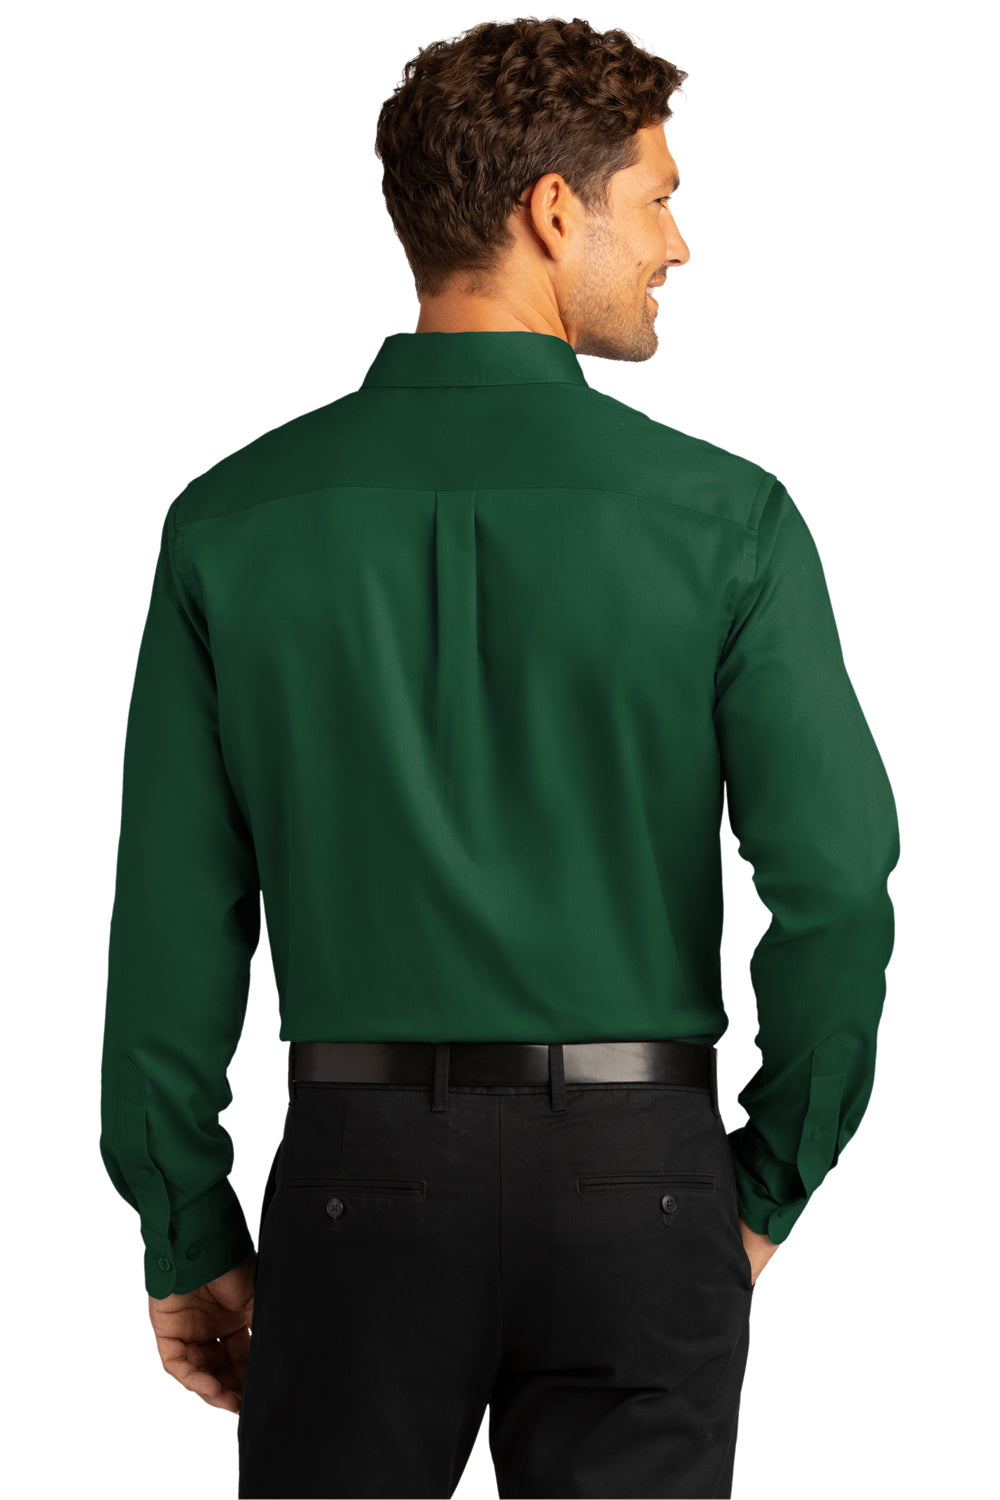 Port Authority Mens SuperPro Wrinkle Resistant React Long Sleeve Button Down Shirt w/ Pocket Dark Green Side